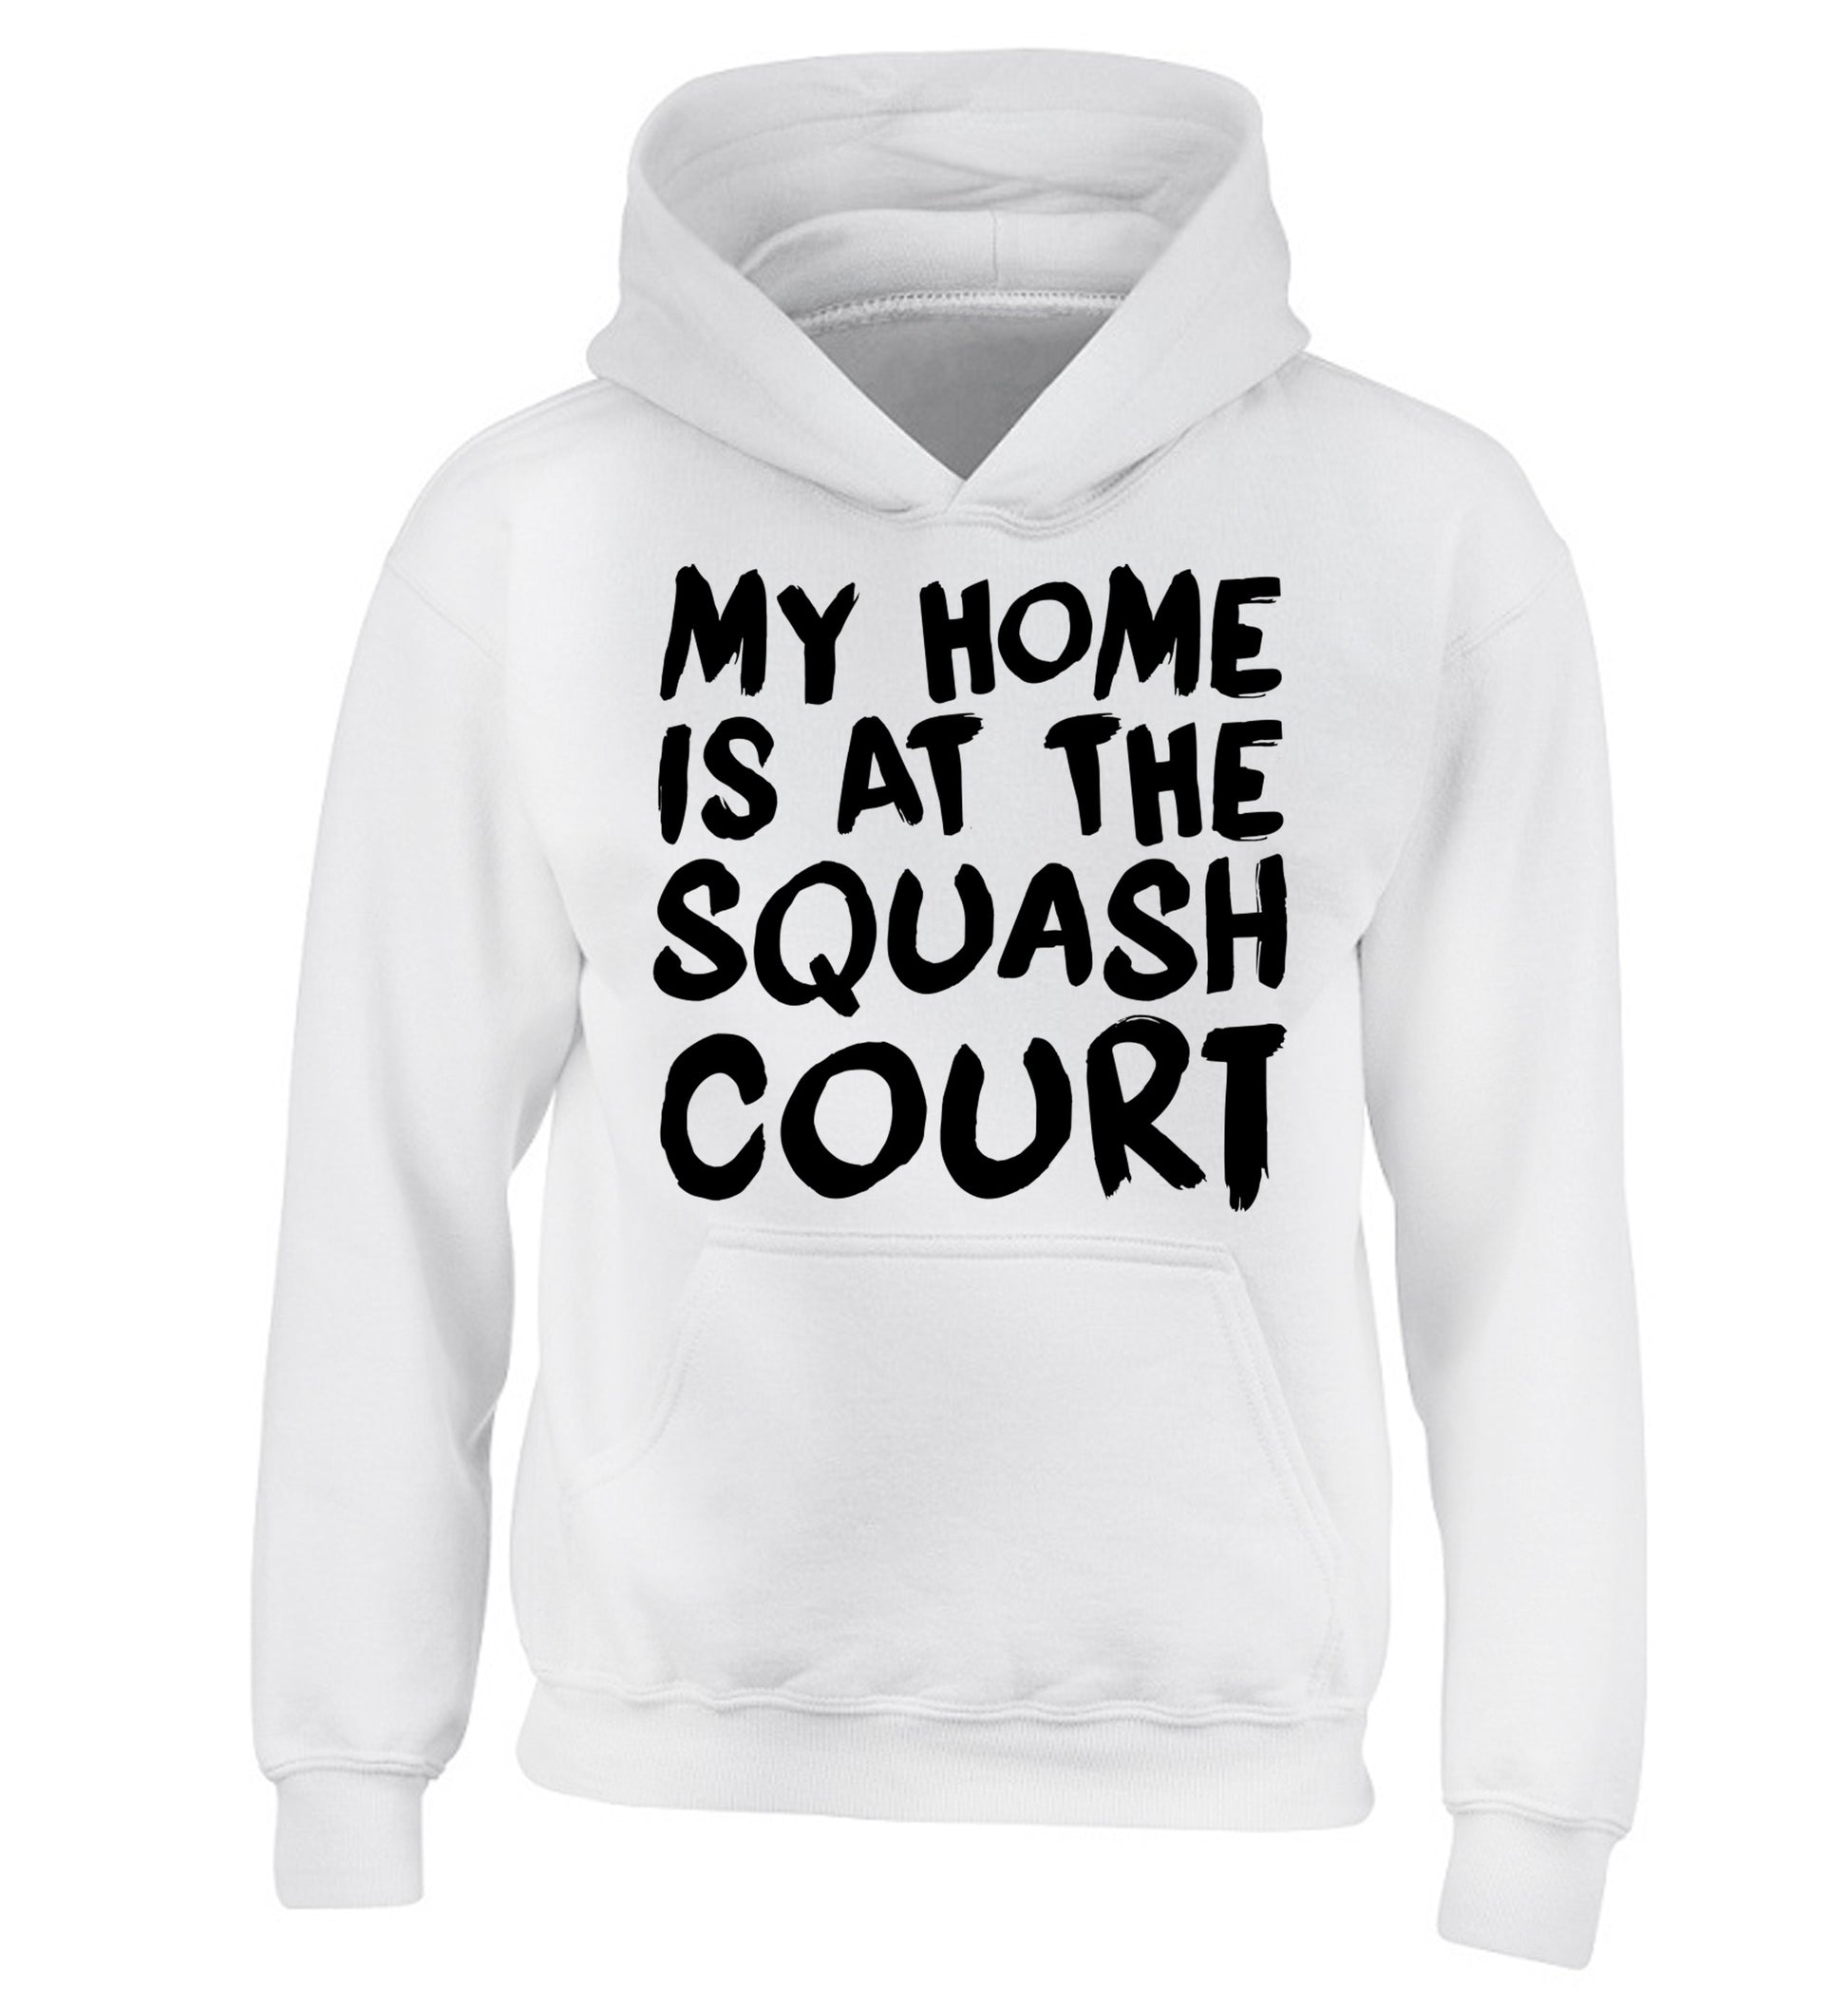 My home is at the squash court children's white hoodie 12-14 Years